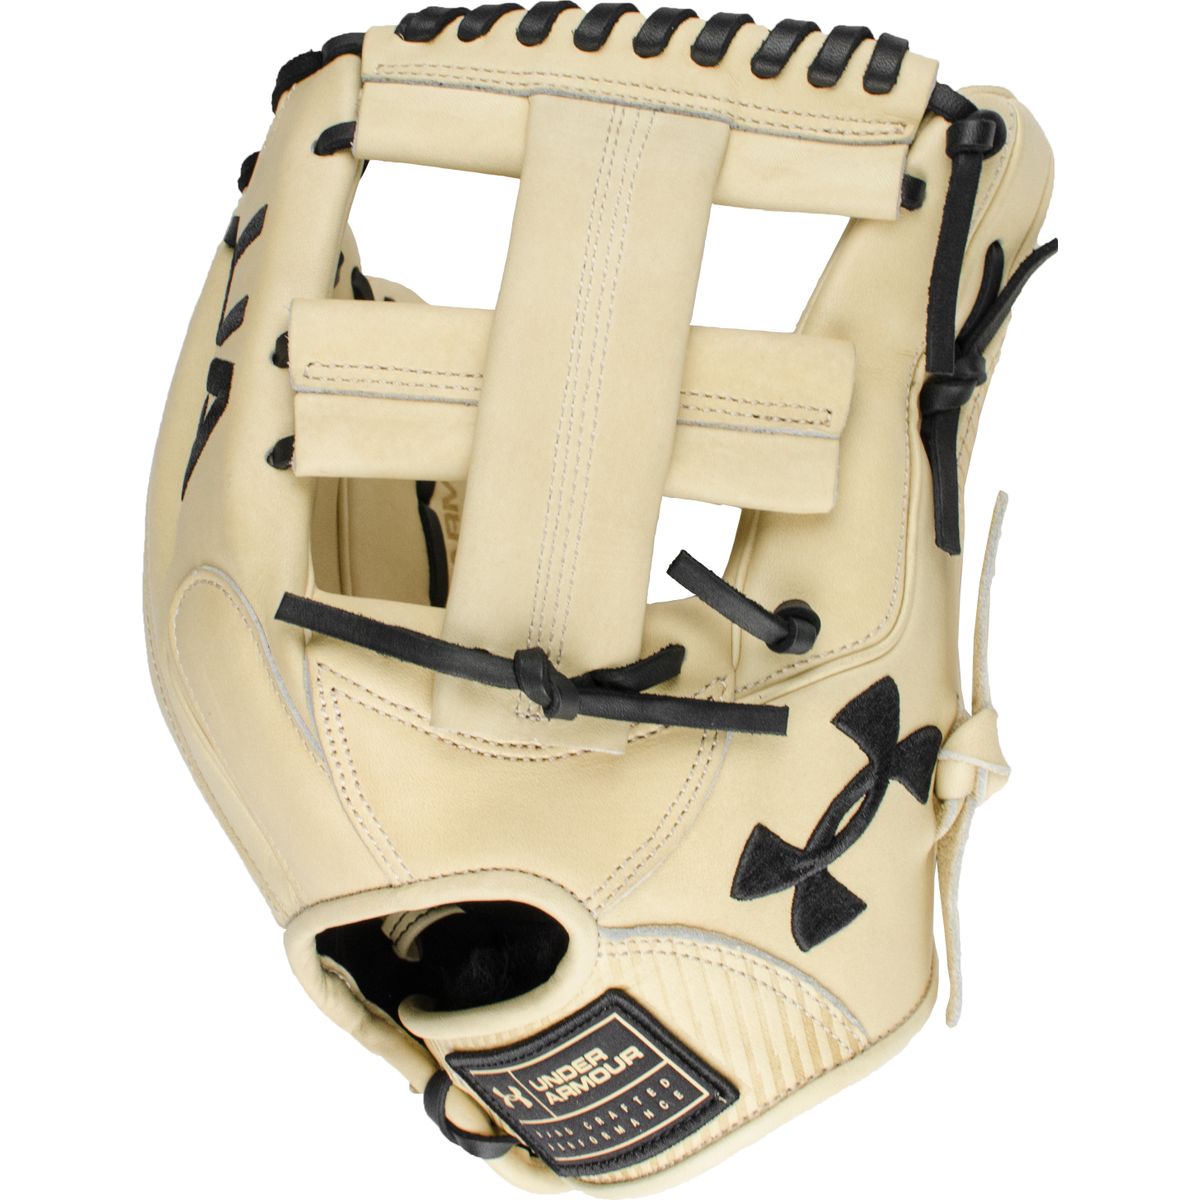 under-armour-flawless-11-75-infield-glove-uafgfl-1175sp